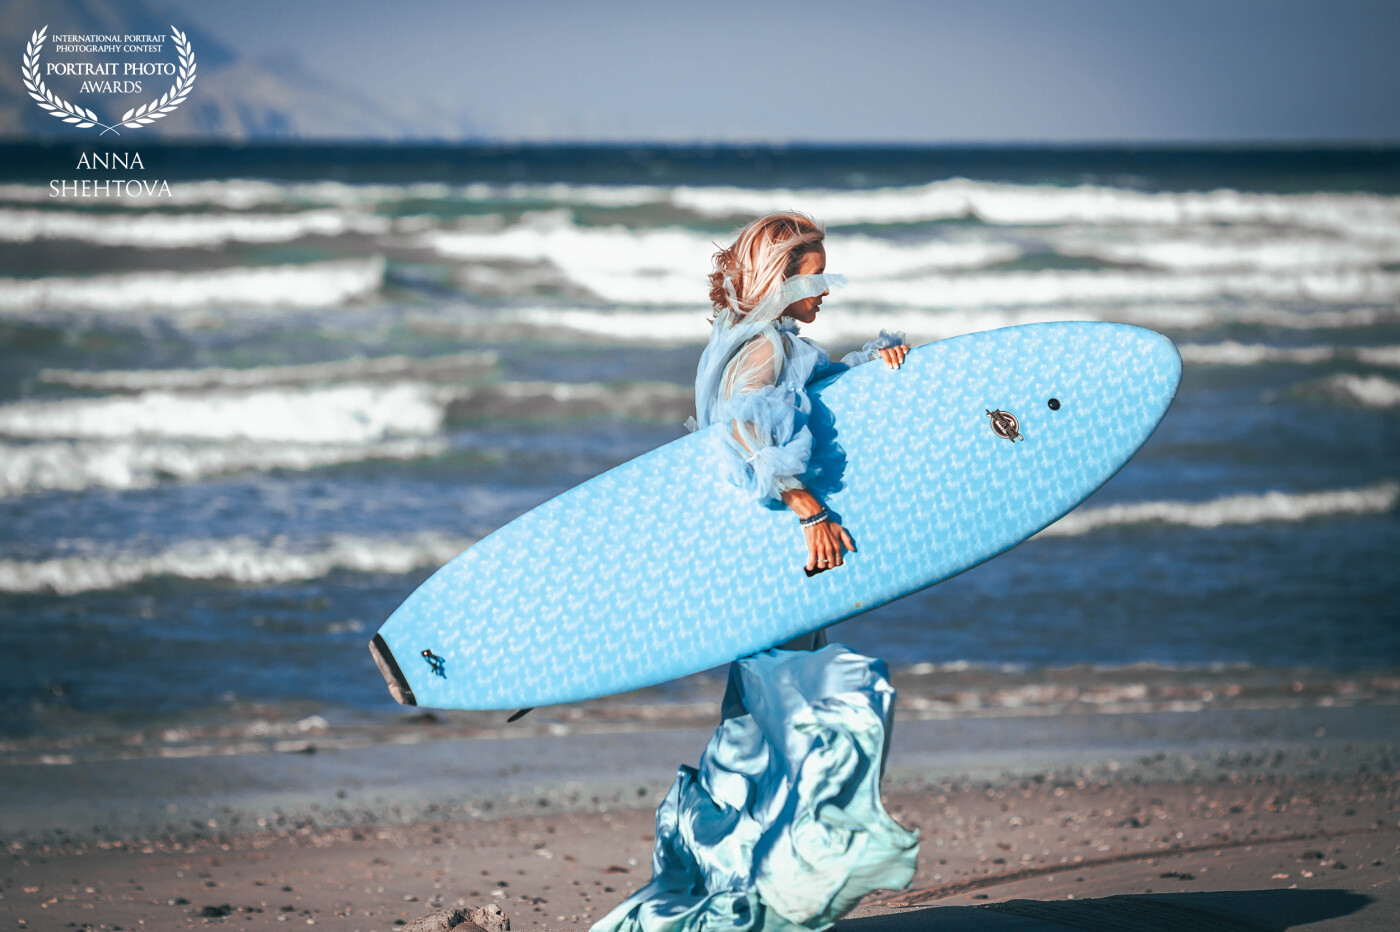 A surfer who lives and breathes the art of surfing waves in her own stylish way